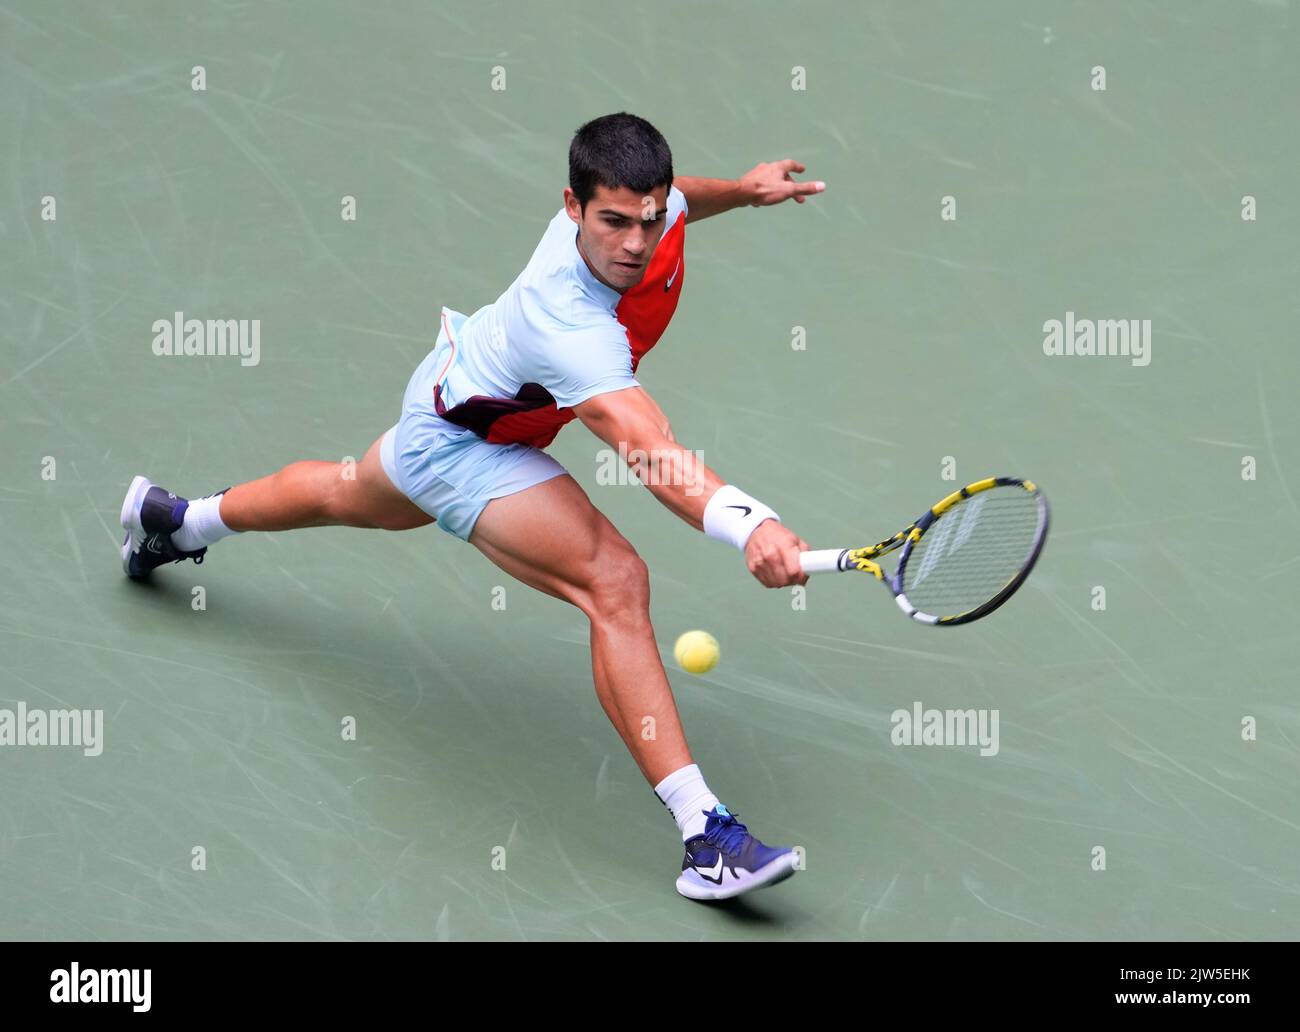 September 3, 2022: Carlos Alcaraz (ESP) leads Jenson Brooksby (USA) 6-3 6-3, after 2 sets at the US Open being played at Billie Jean King Ntional Tennis Center in Flushing, Queens, New York/USA © Grace Schultz/CSM Stock Photo